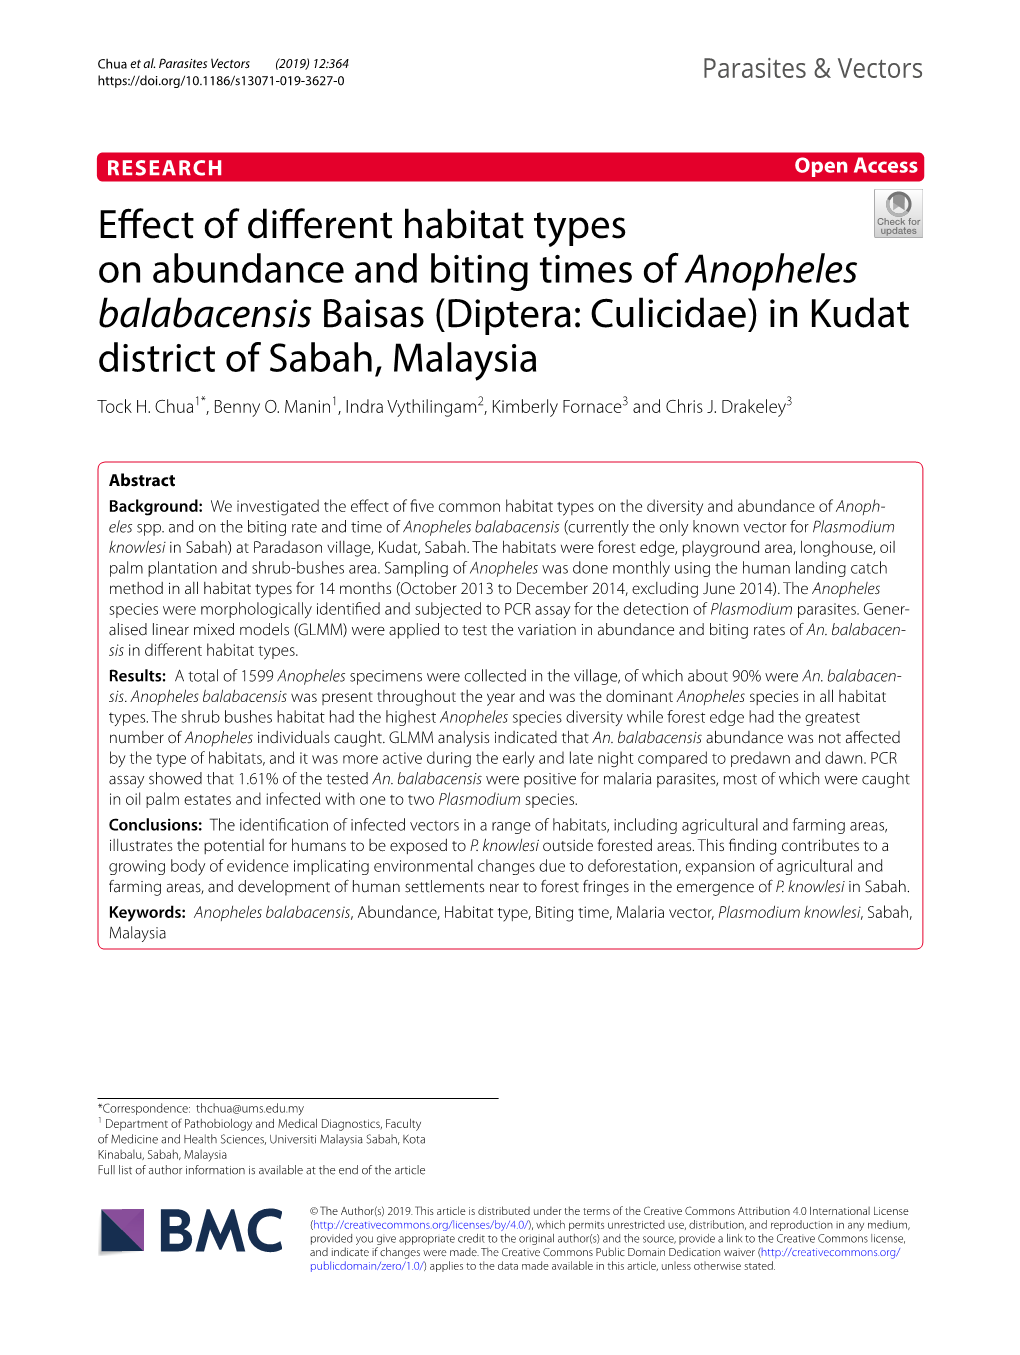 Effect of Different Habitat Types on Abundance and Biting Times Of